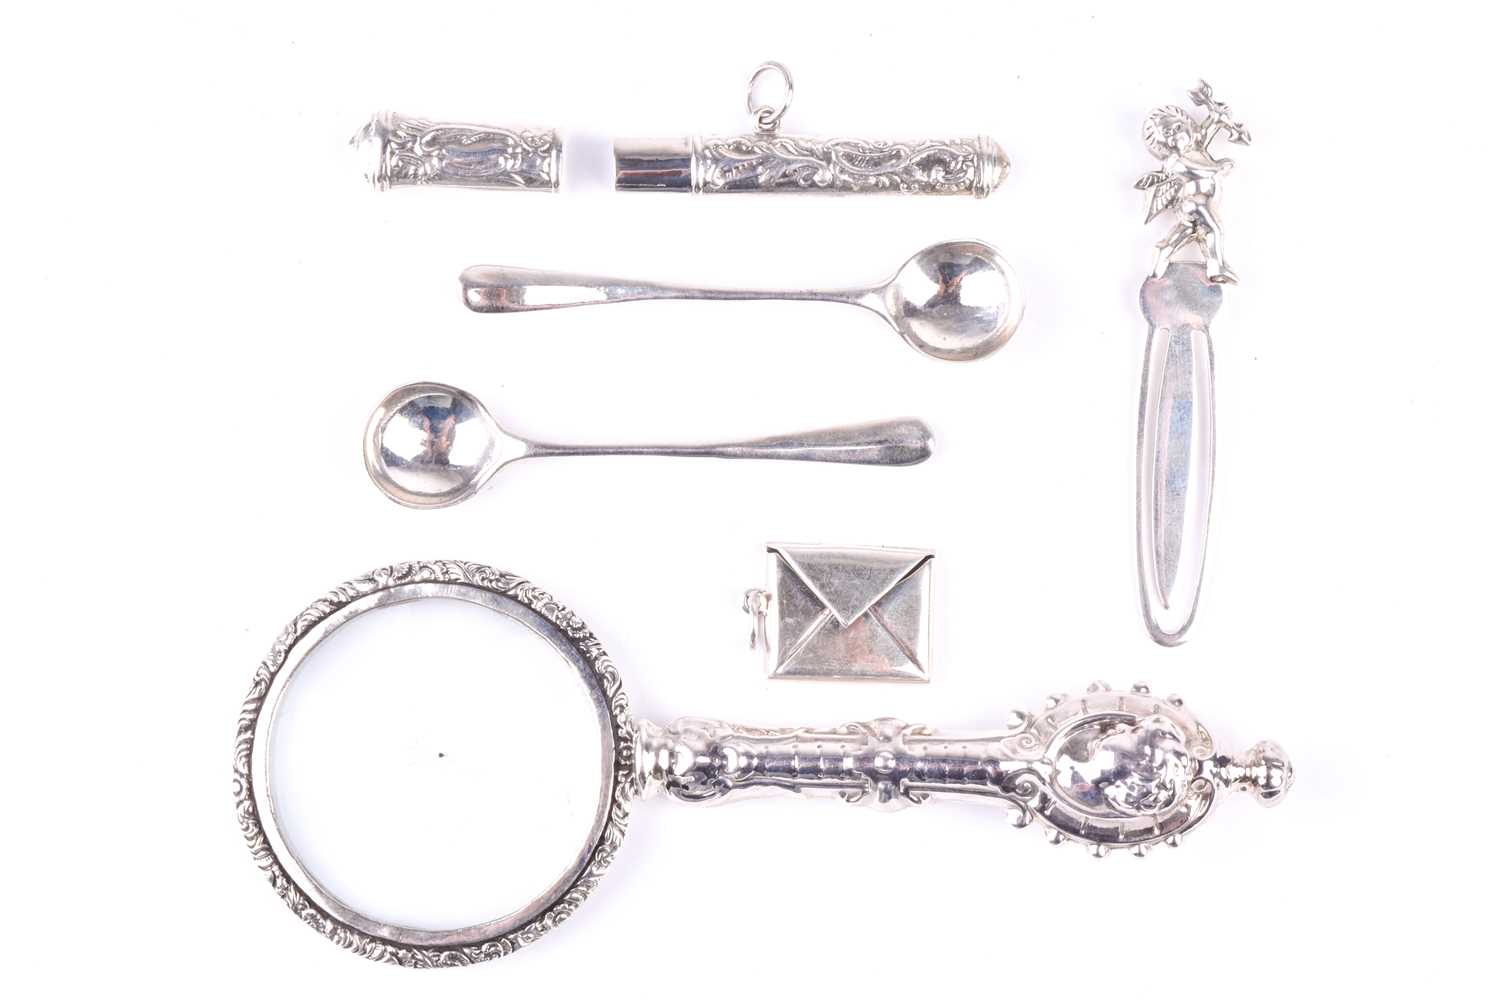 A white metal mounted magnifying glass, with cherub decoration, together with a pair of silver